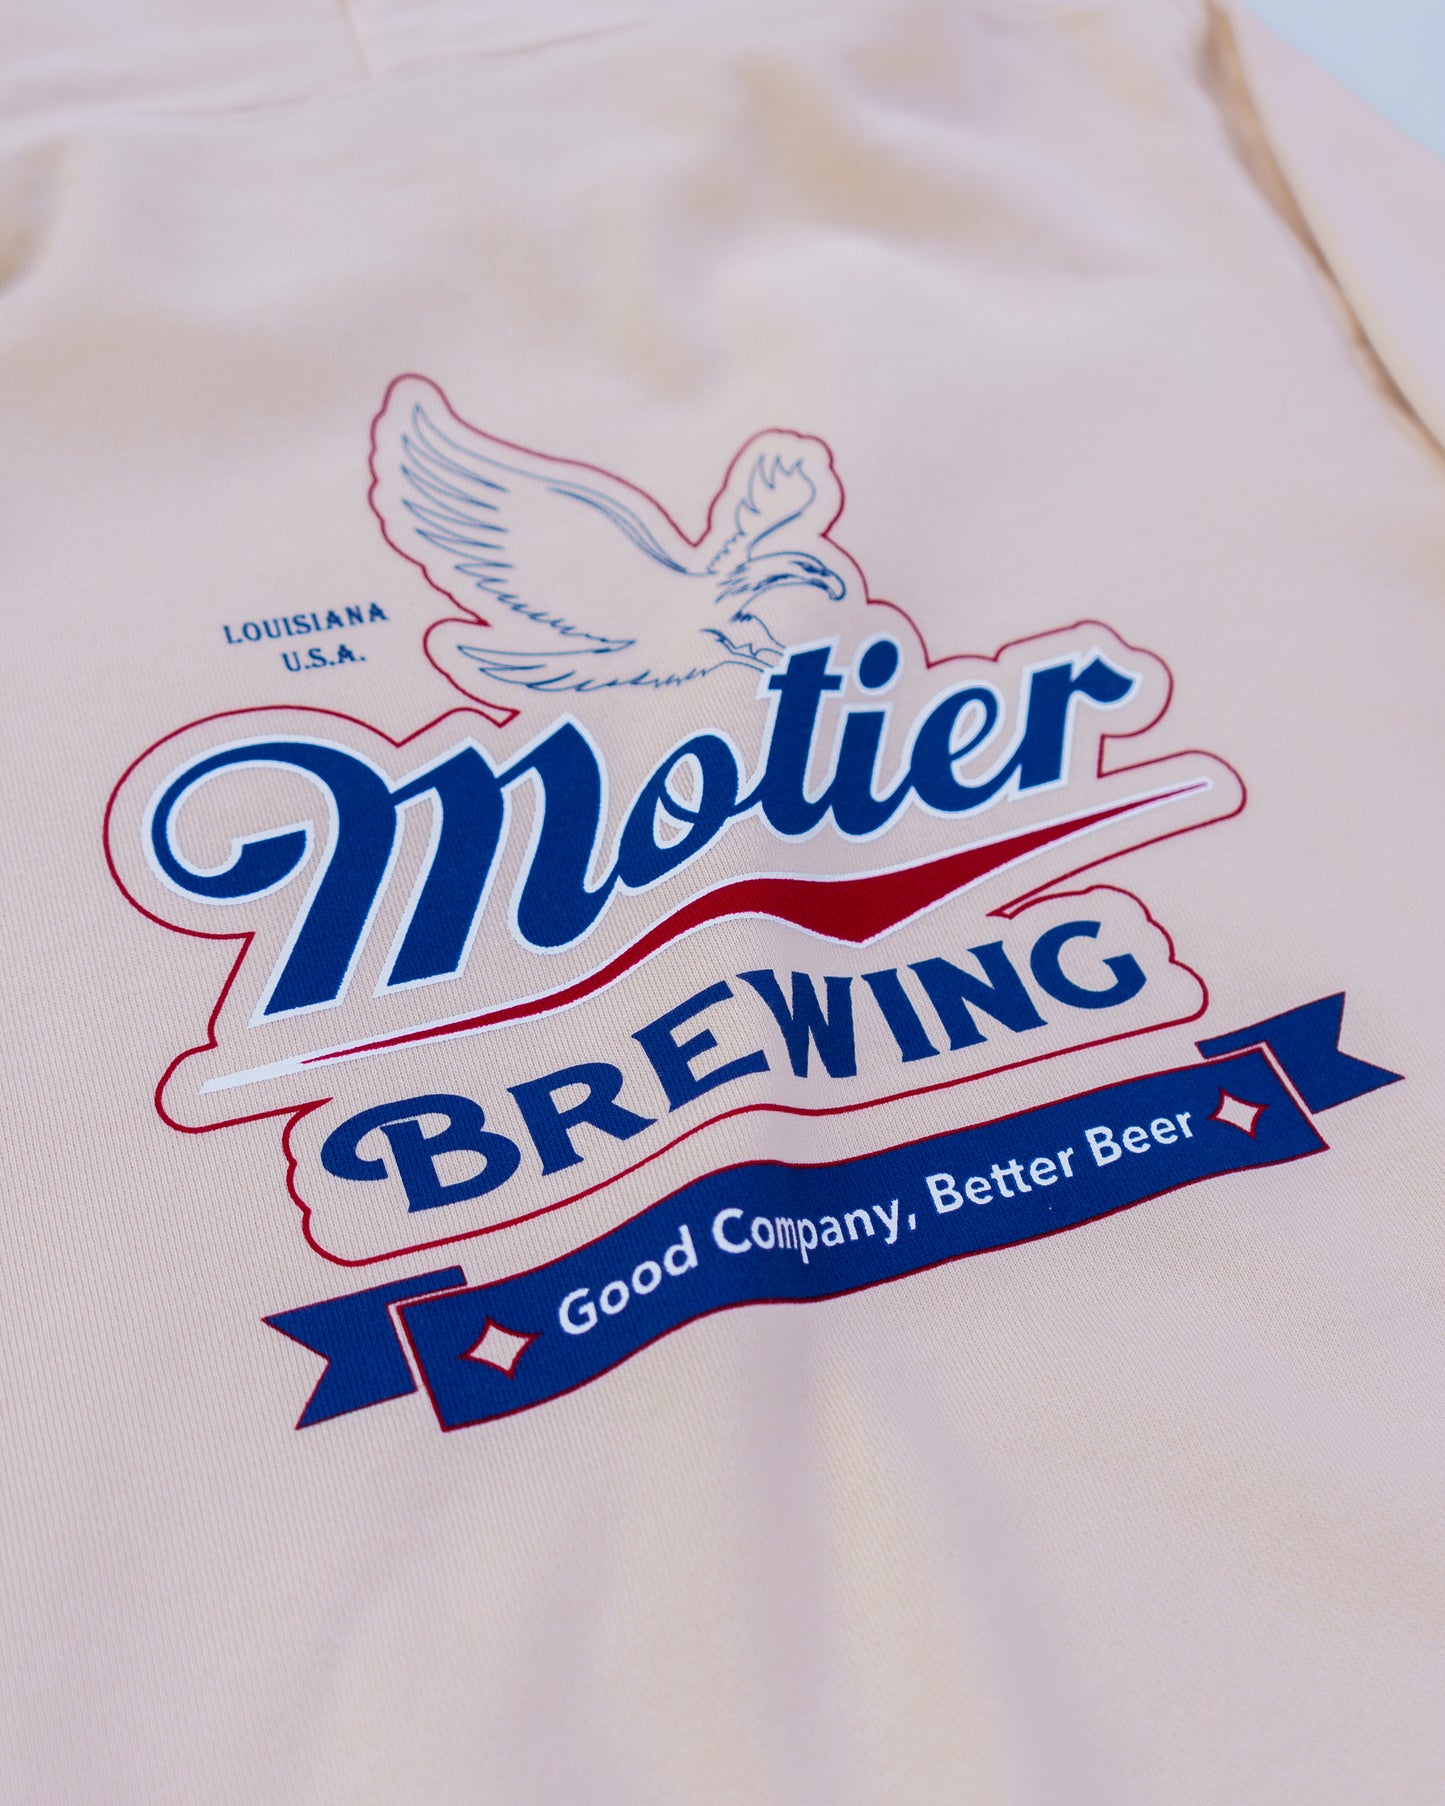 The Motier Brewery Luxe Hoodie (Sand)